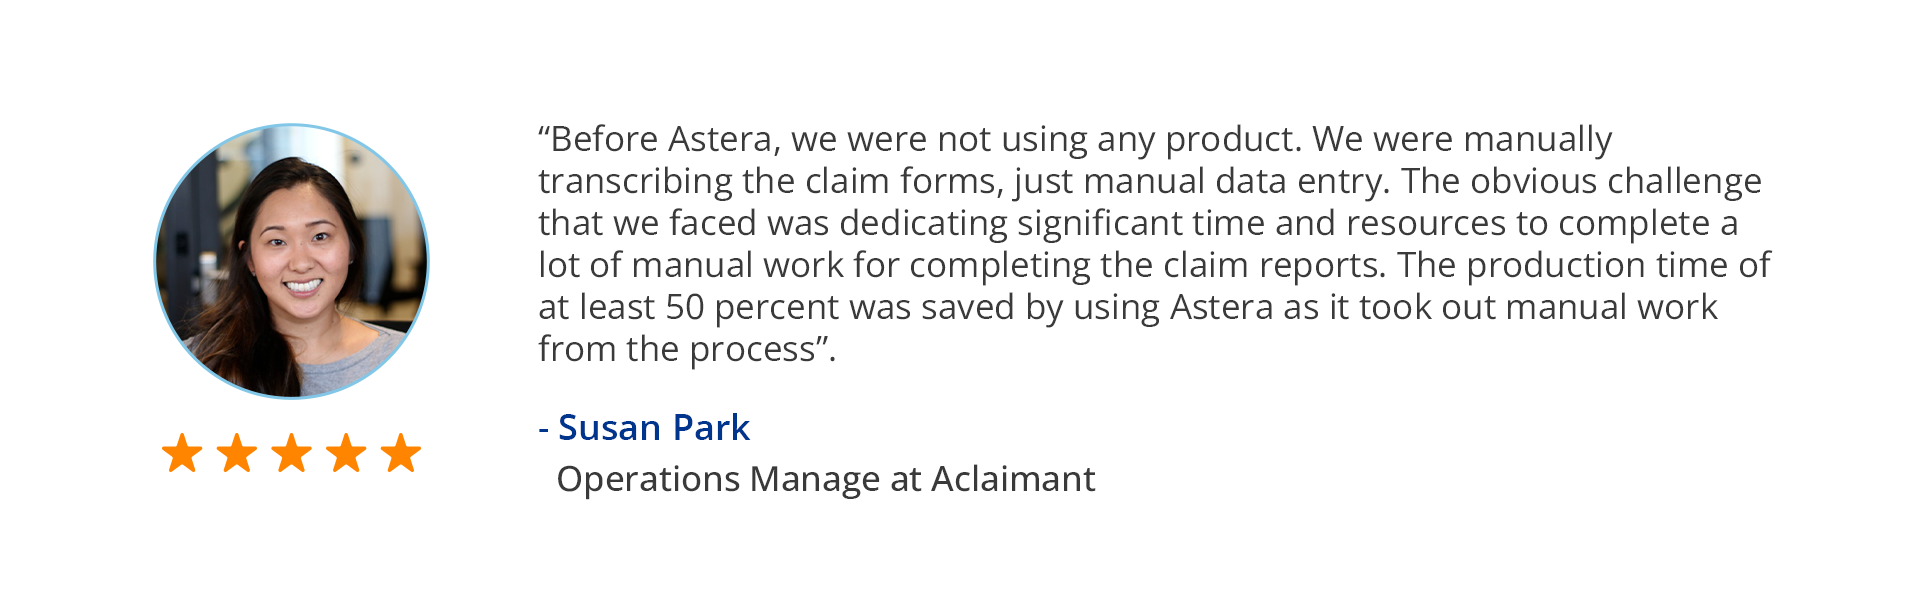 Astera Customer Review for Claim Form Processing Reviews. 